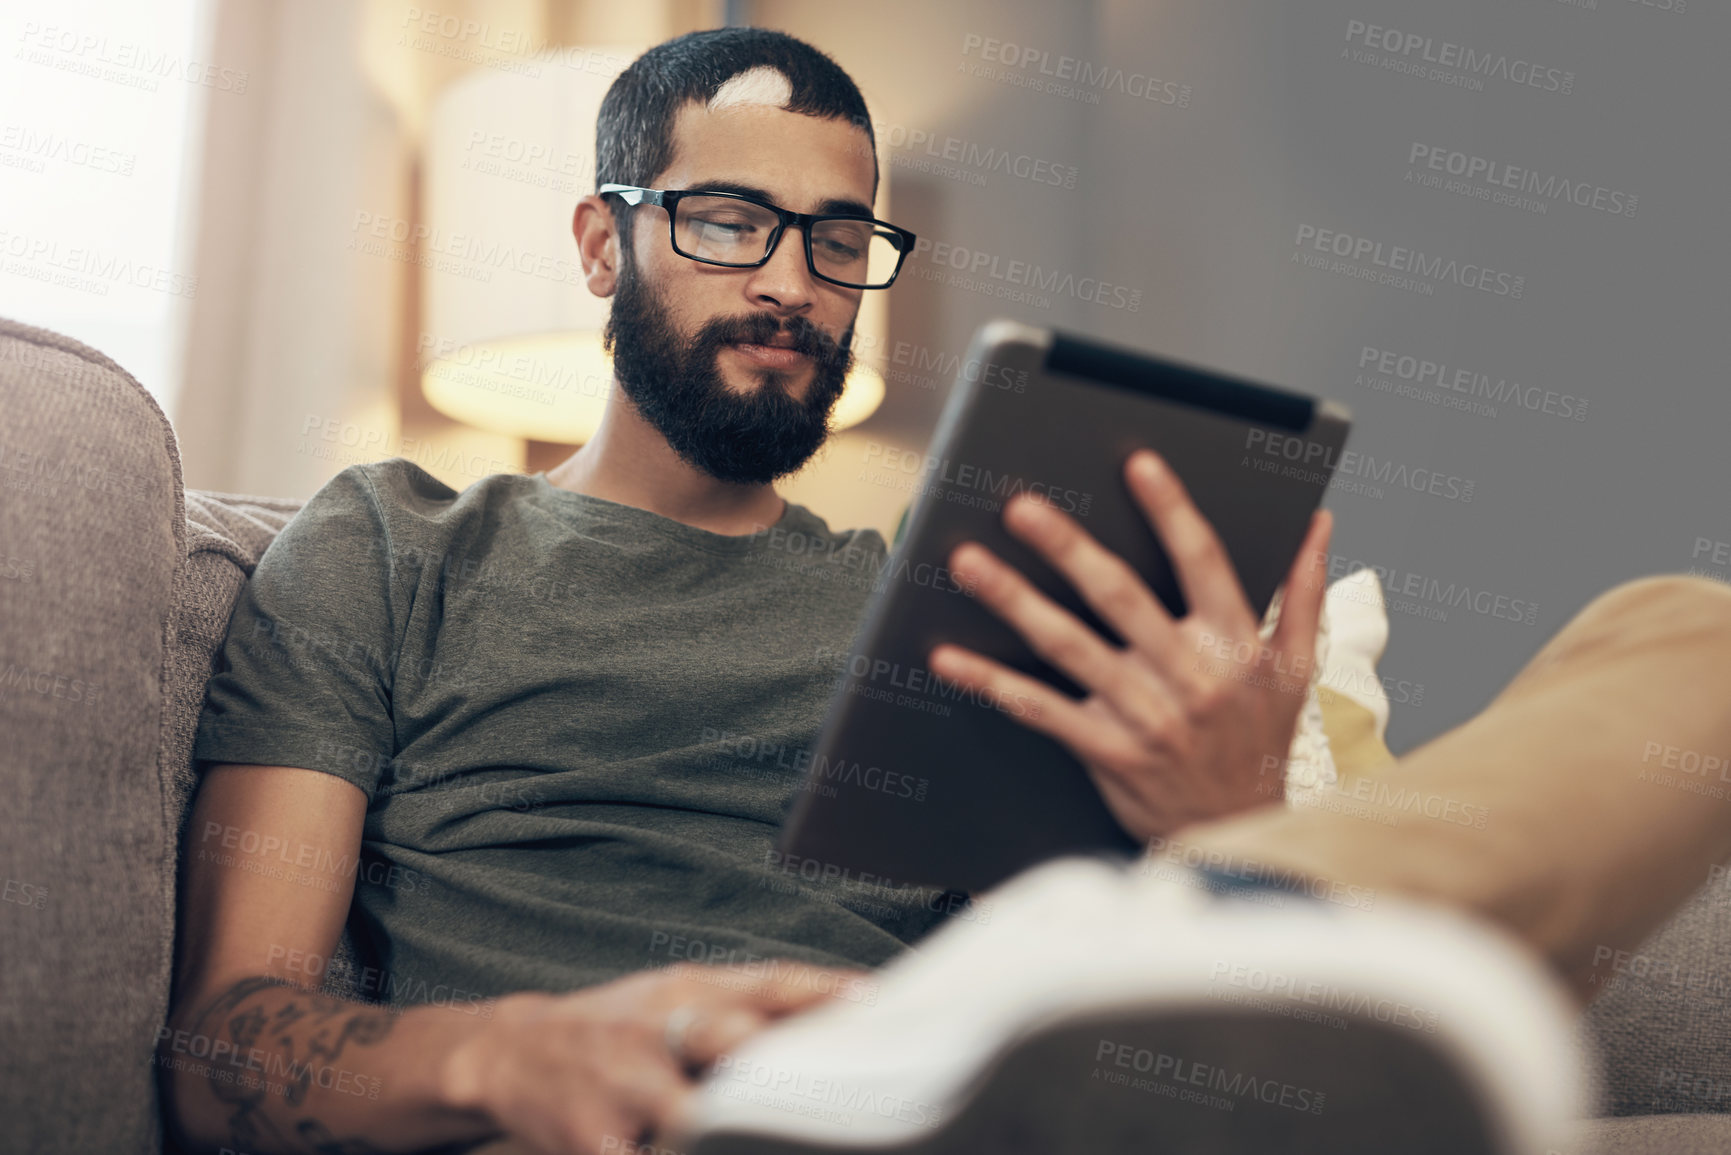 Buy stock photo Shot of a young man using a digital tablet on the sofa at home